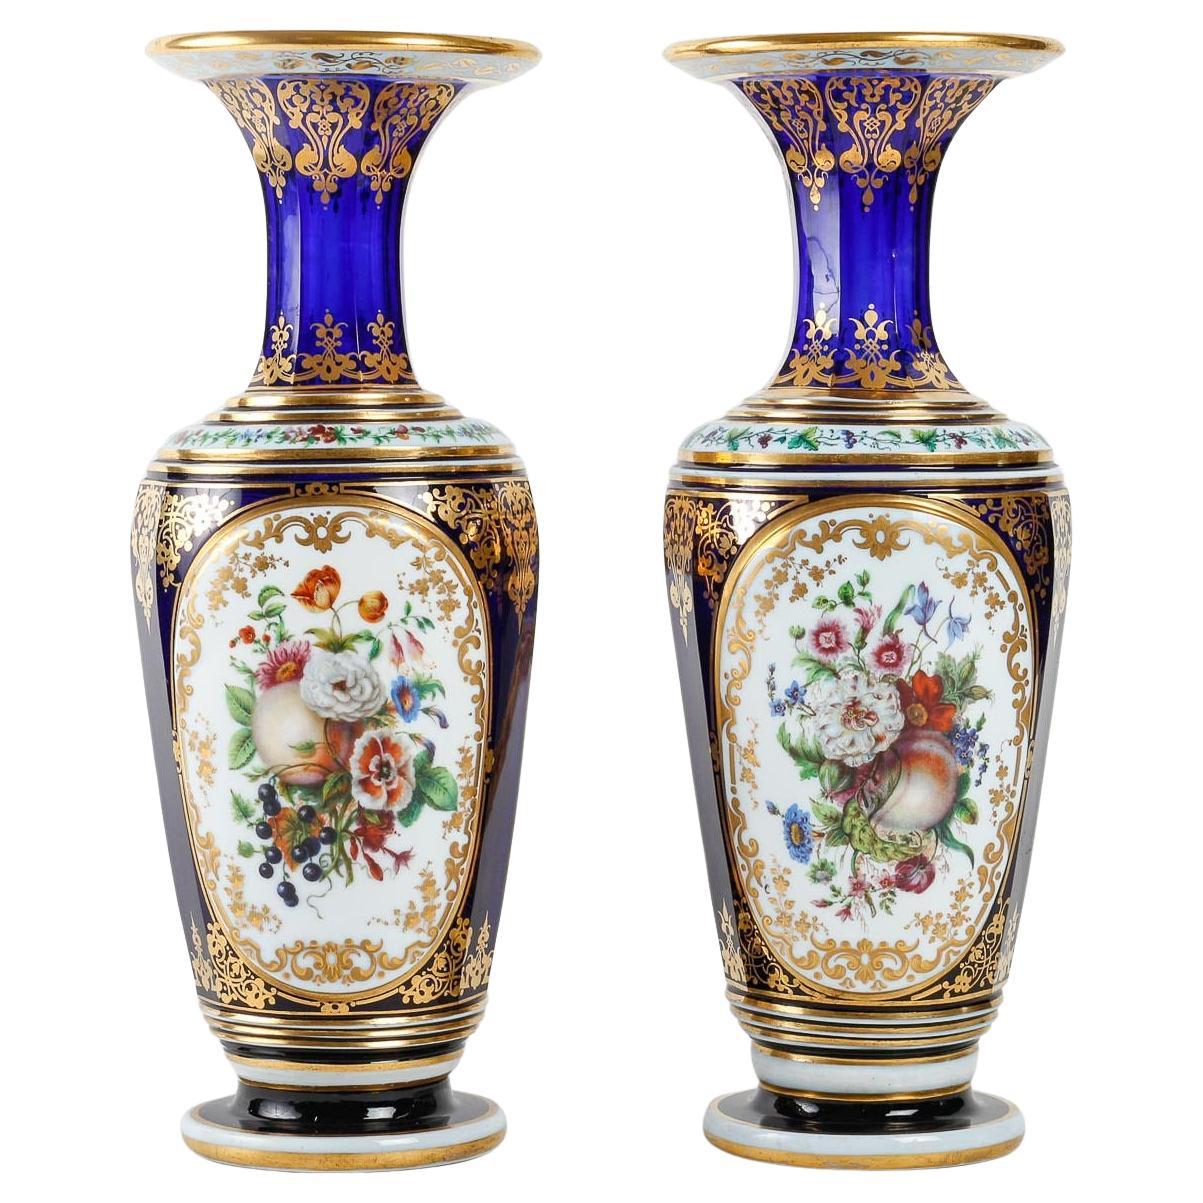 Pair of Baccarat Crystal and Painted Opaline Vases, Napoleon III Period.